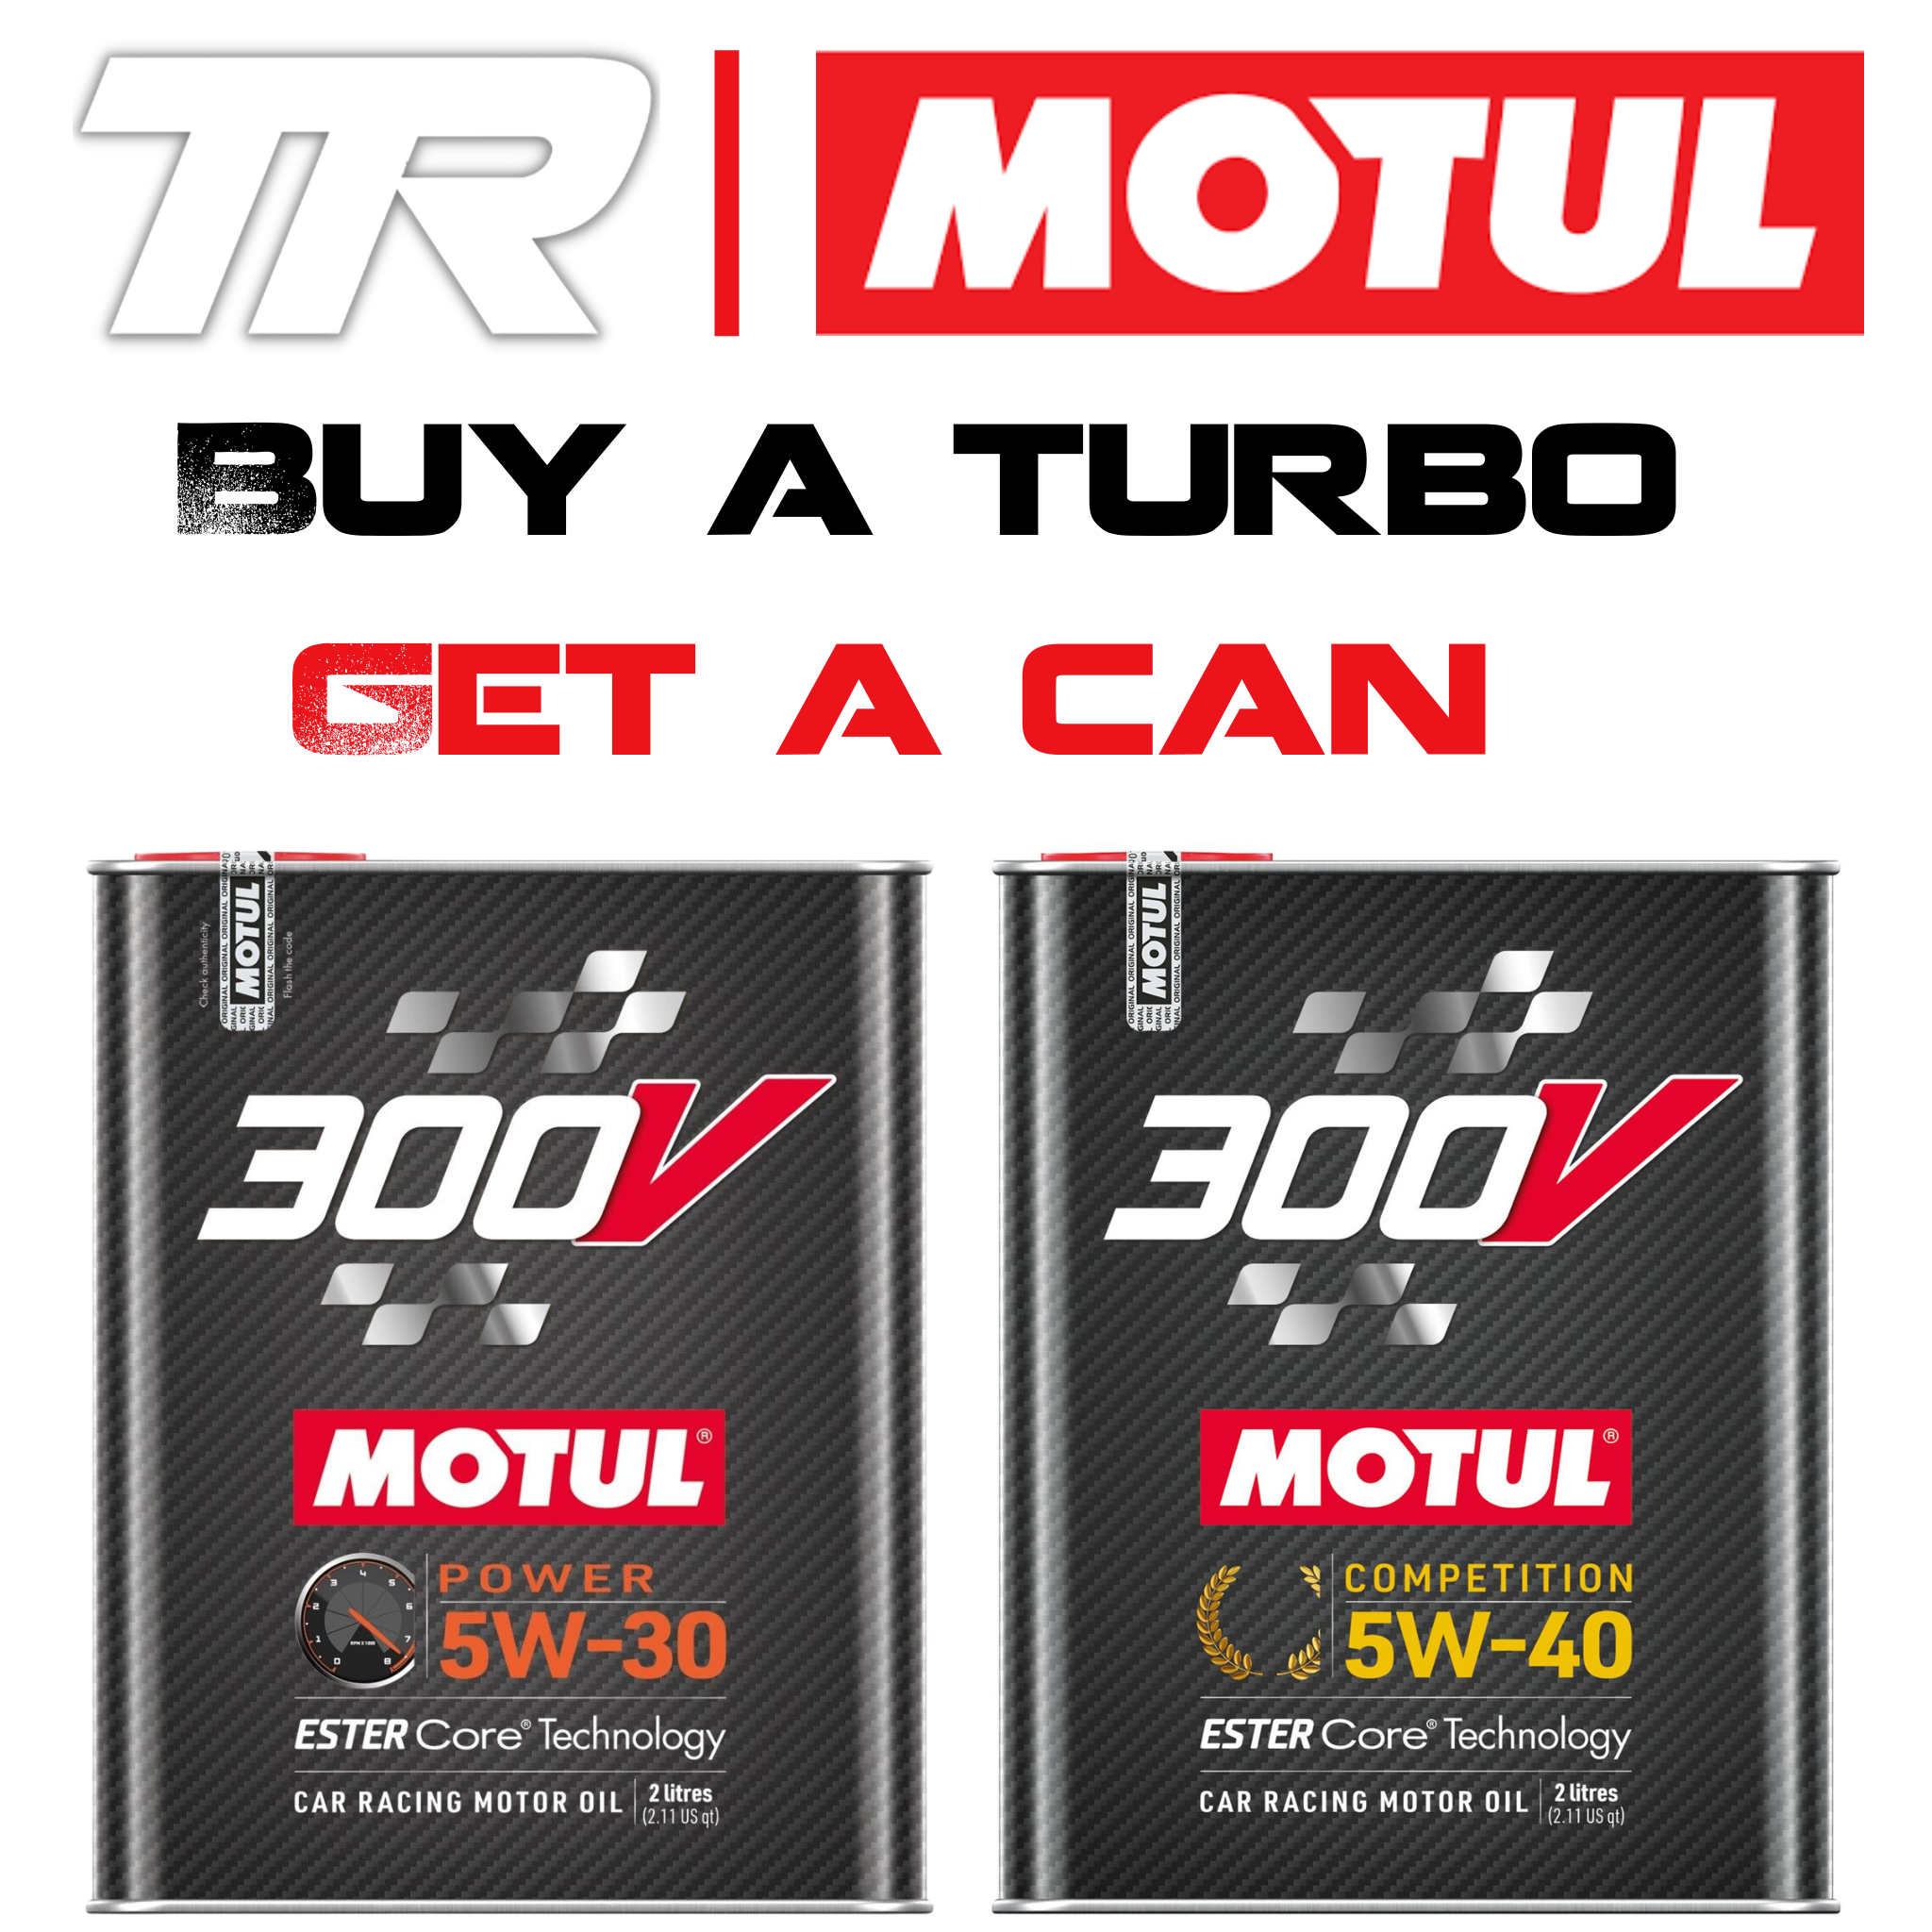 TR Turbo Upgrade for 2016+ Porsche Macan 2.0T and Motul 300V Power & Competition